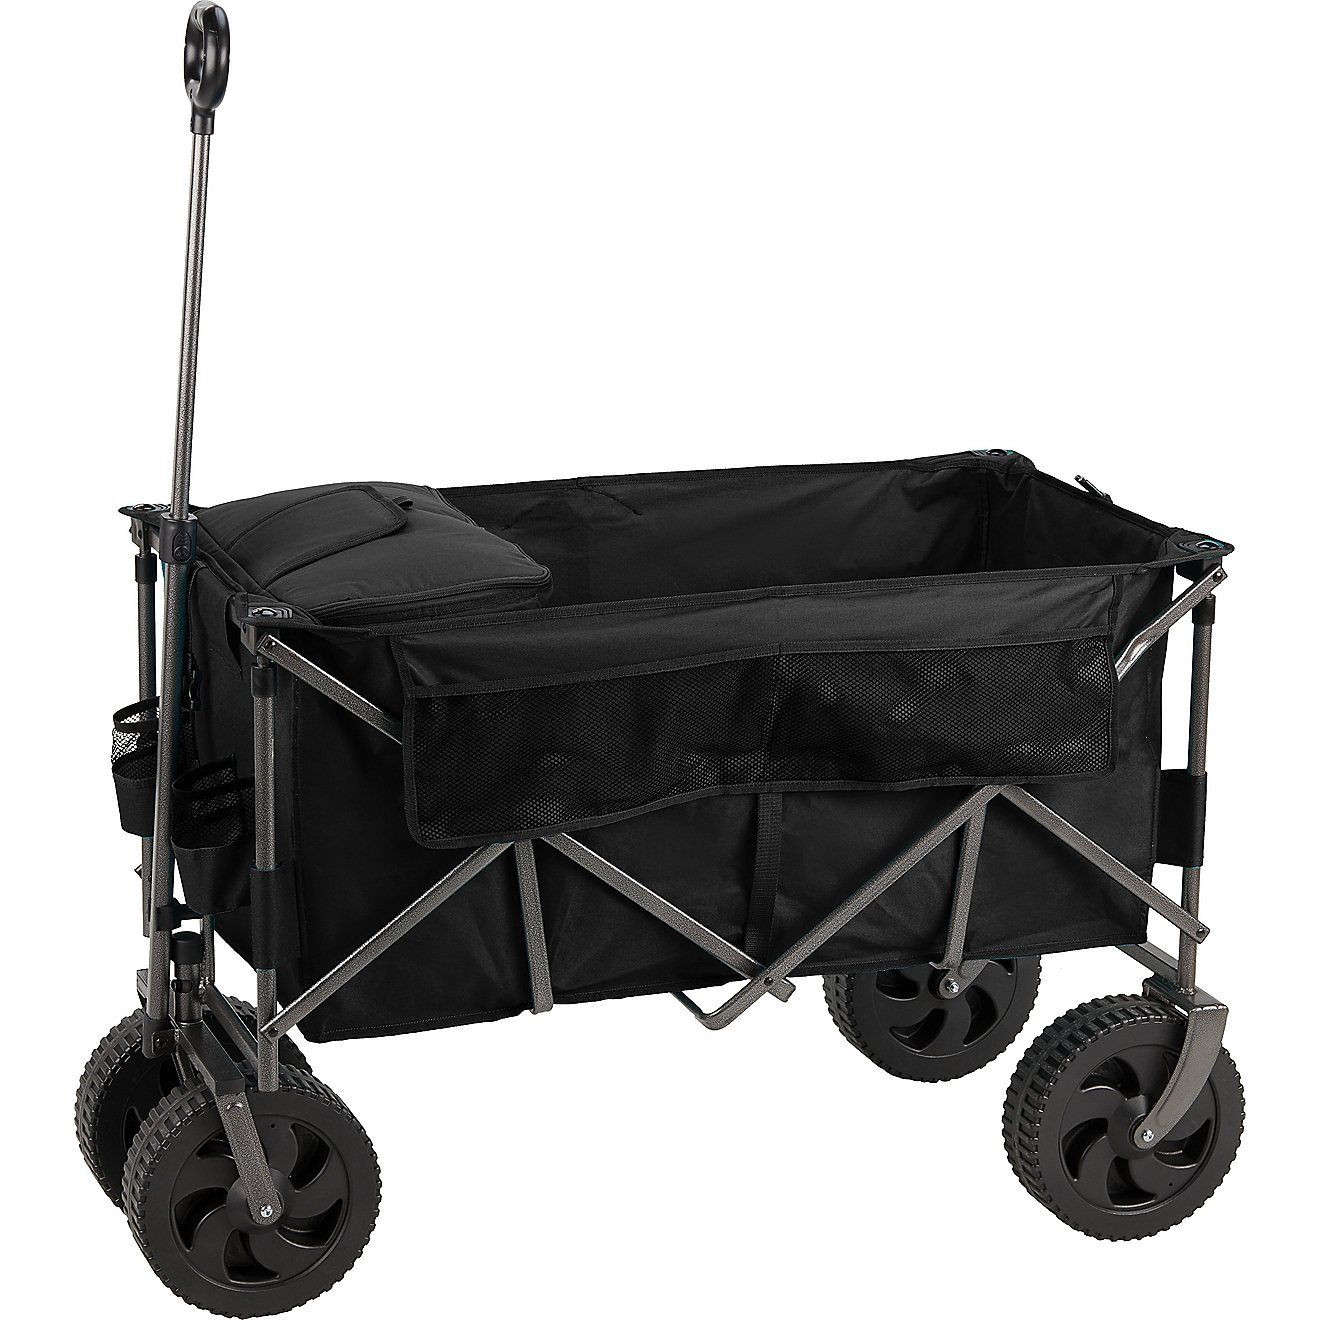 Academy Sports + Outdoors XL Sport Wagon with Cooler | Academy | Academy Sports + Outdoors